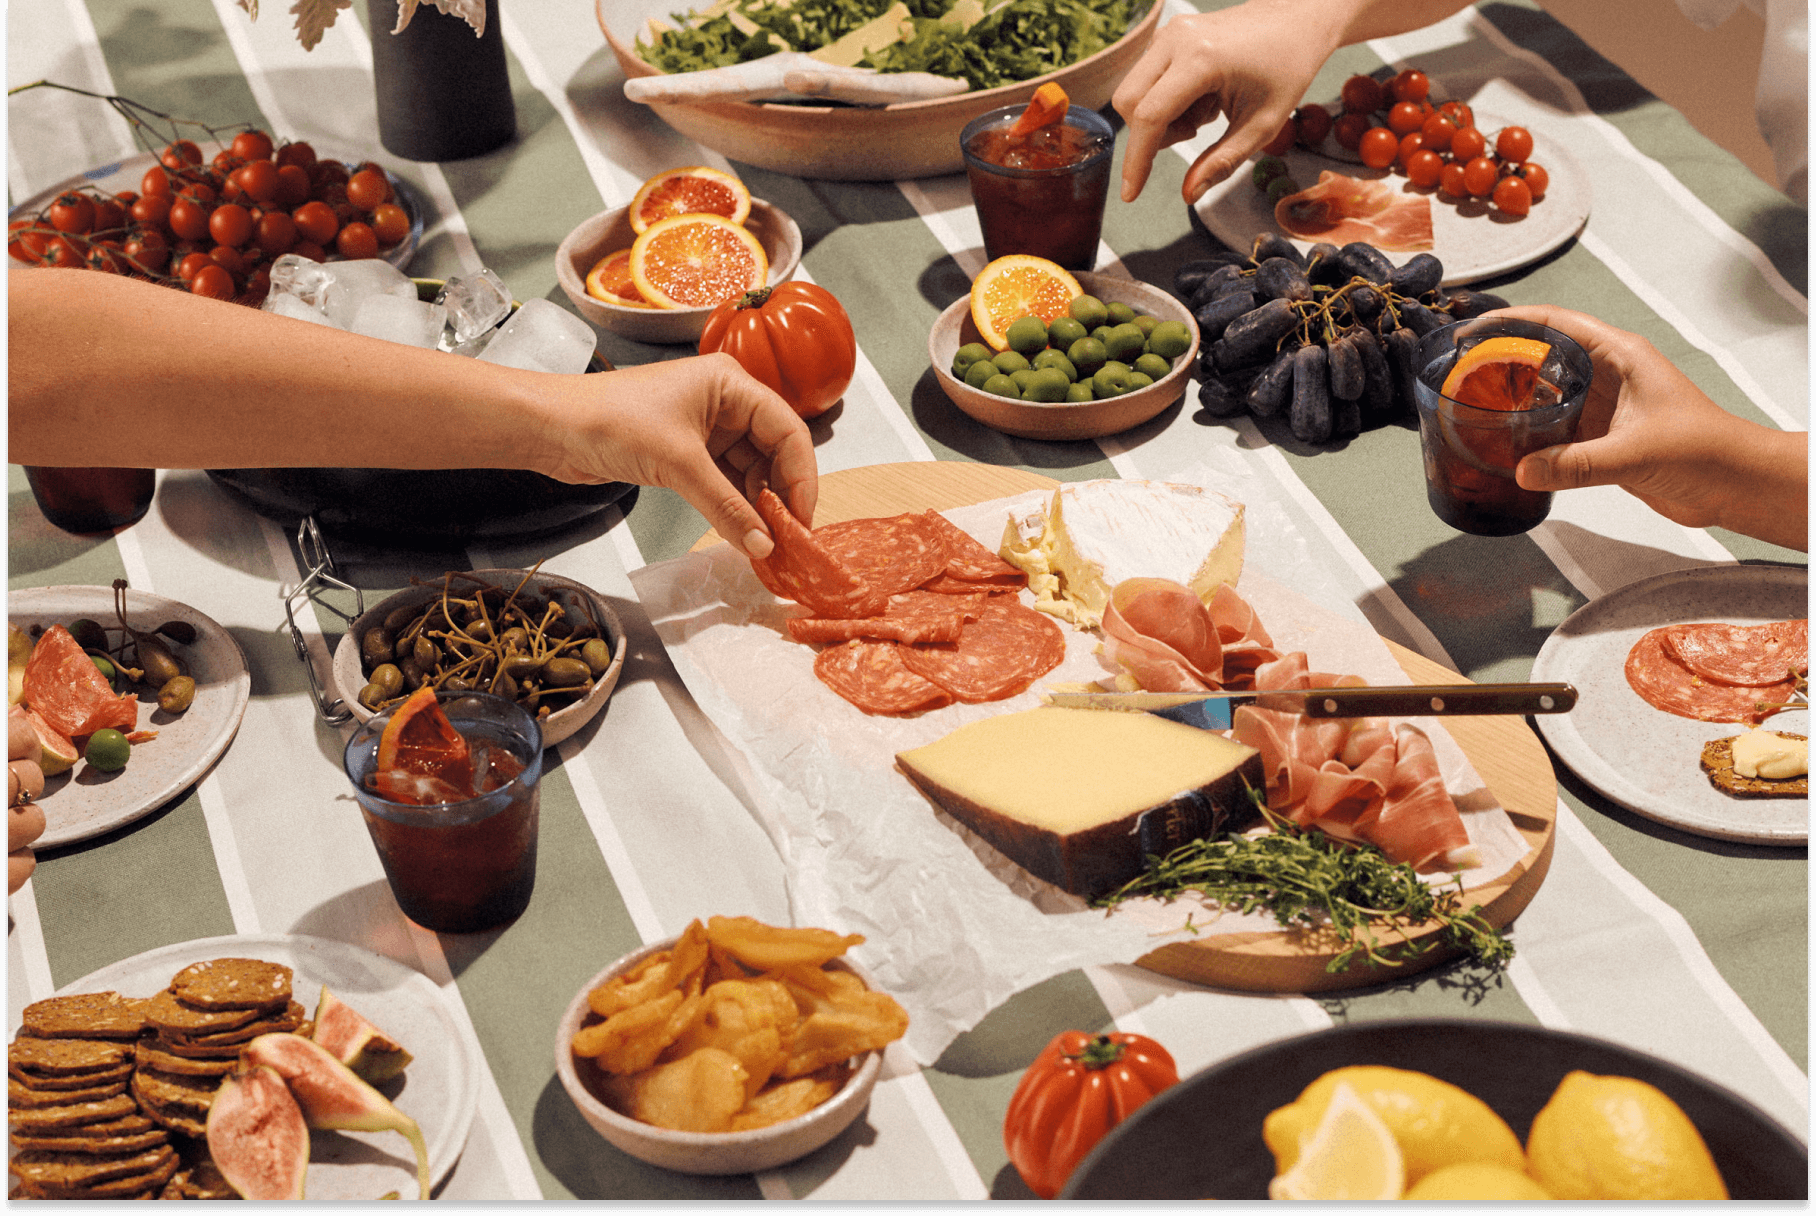 Hands reach over a green striped table top covered in finger food, like cheese and charcuterie, olives, grapes, cherry tomatoes, and more.